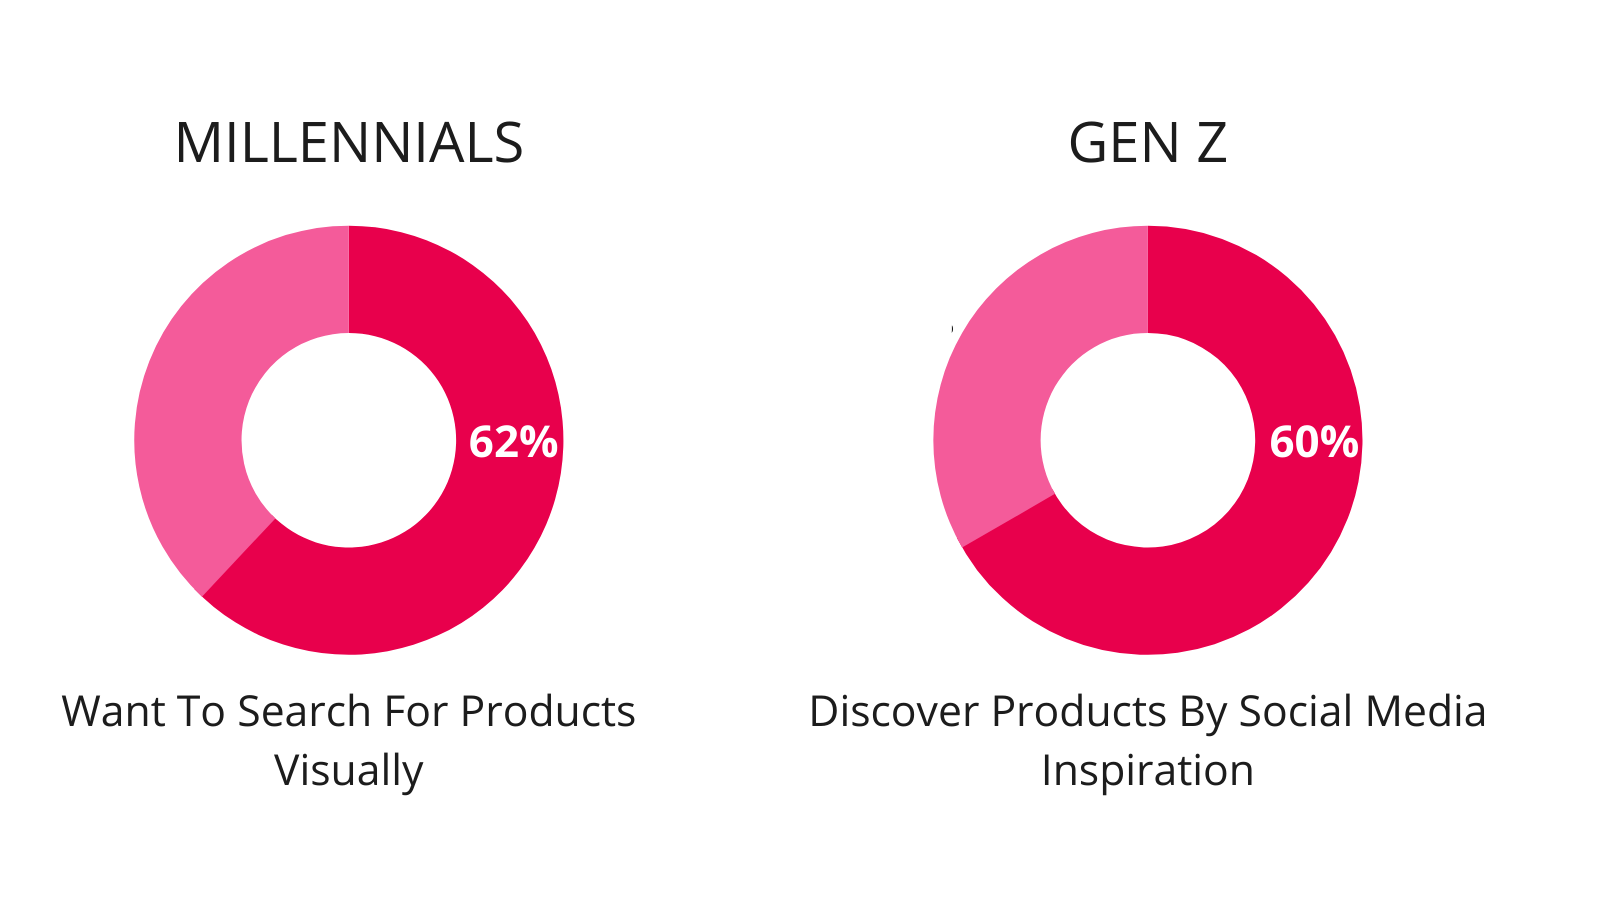 millennial and gen z want visual search